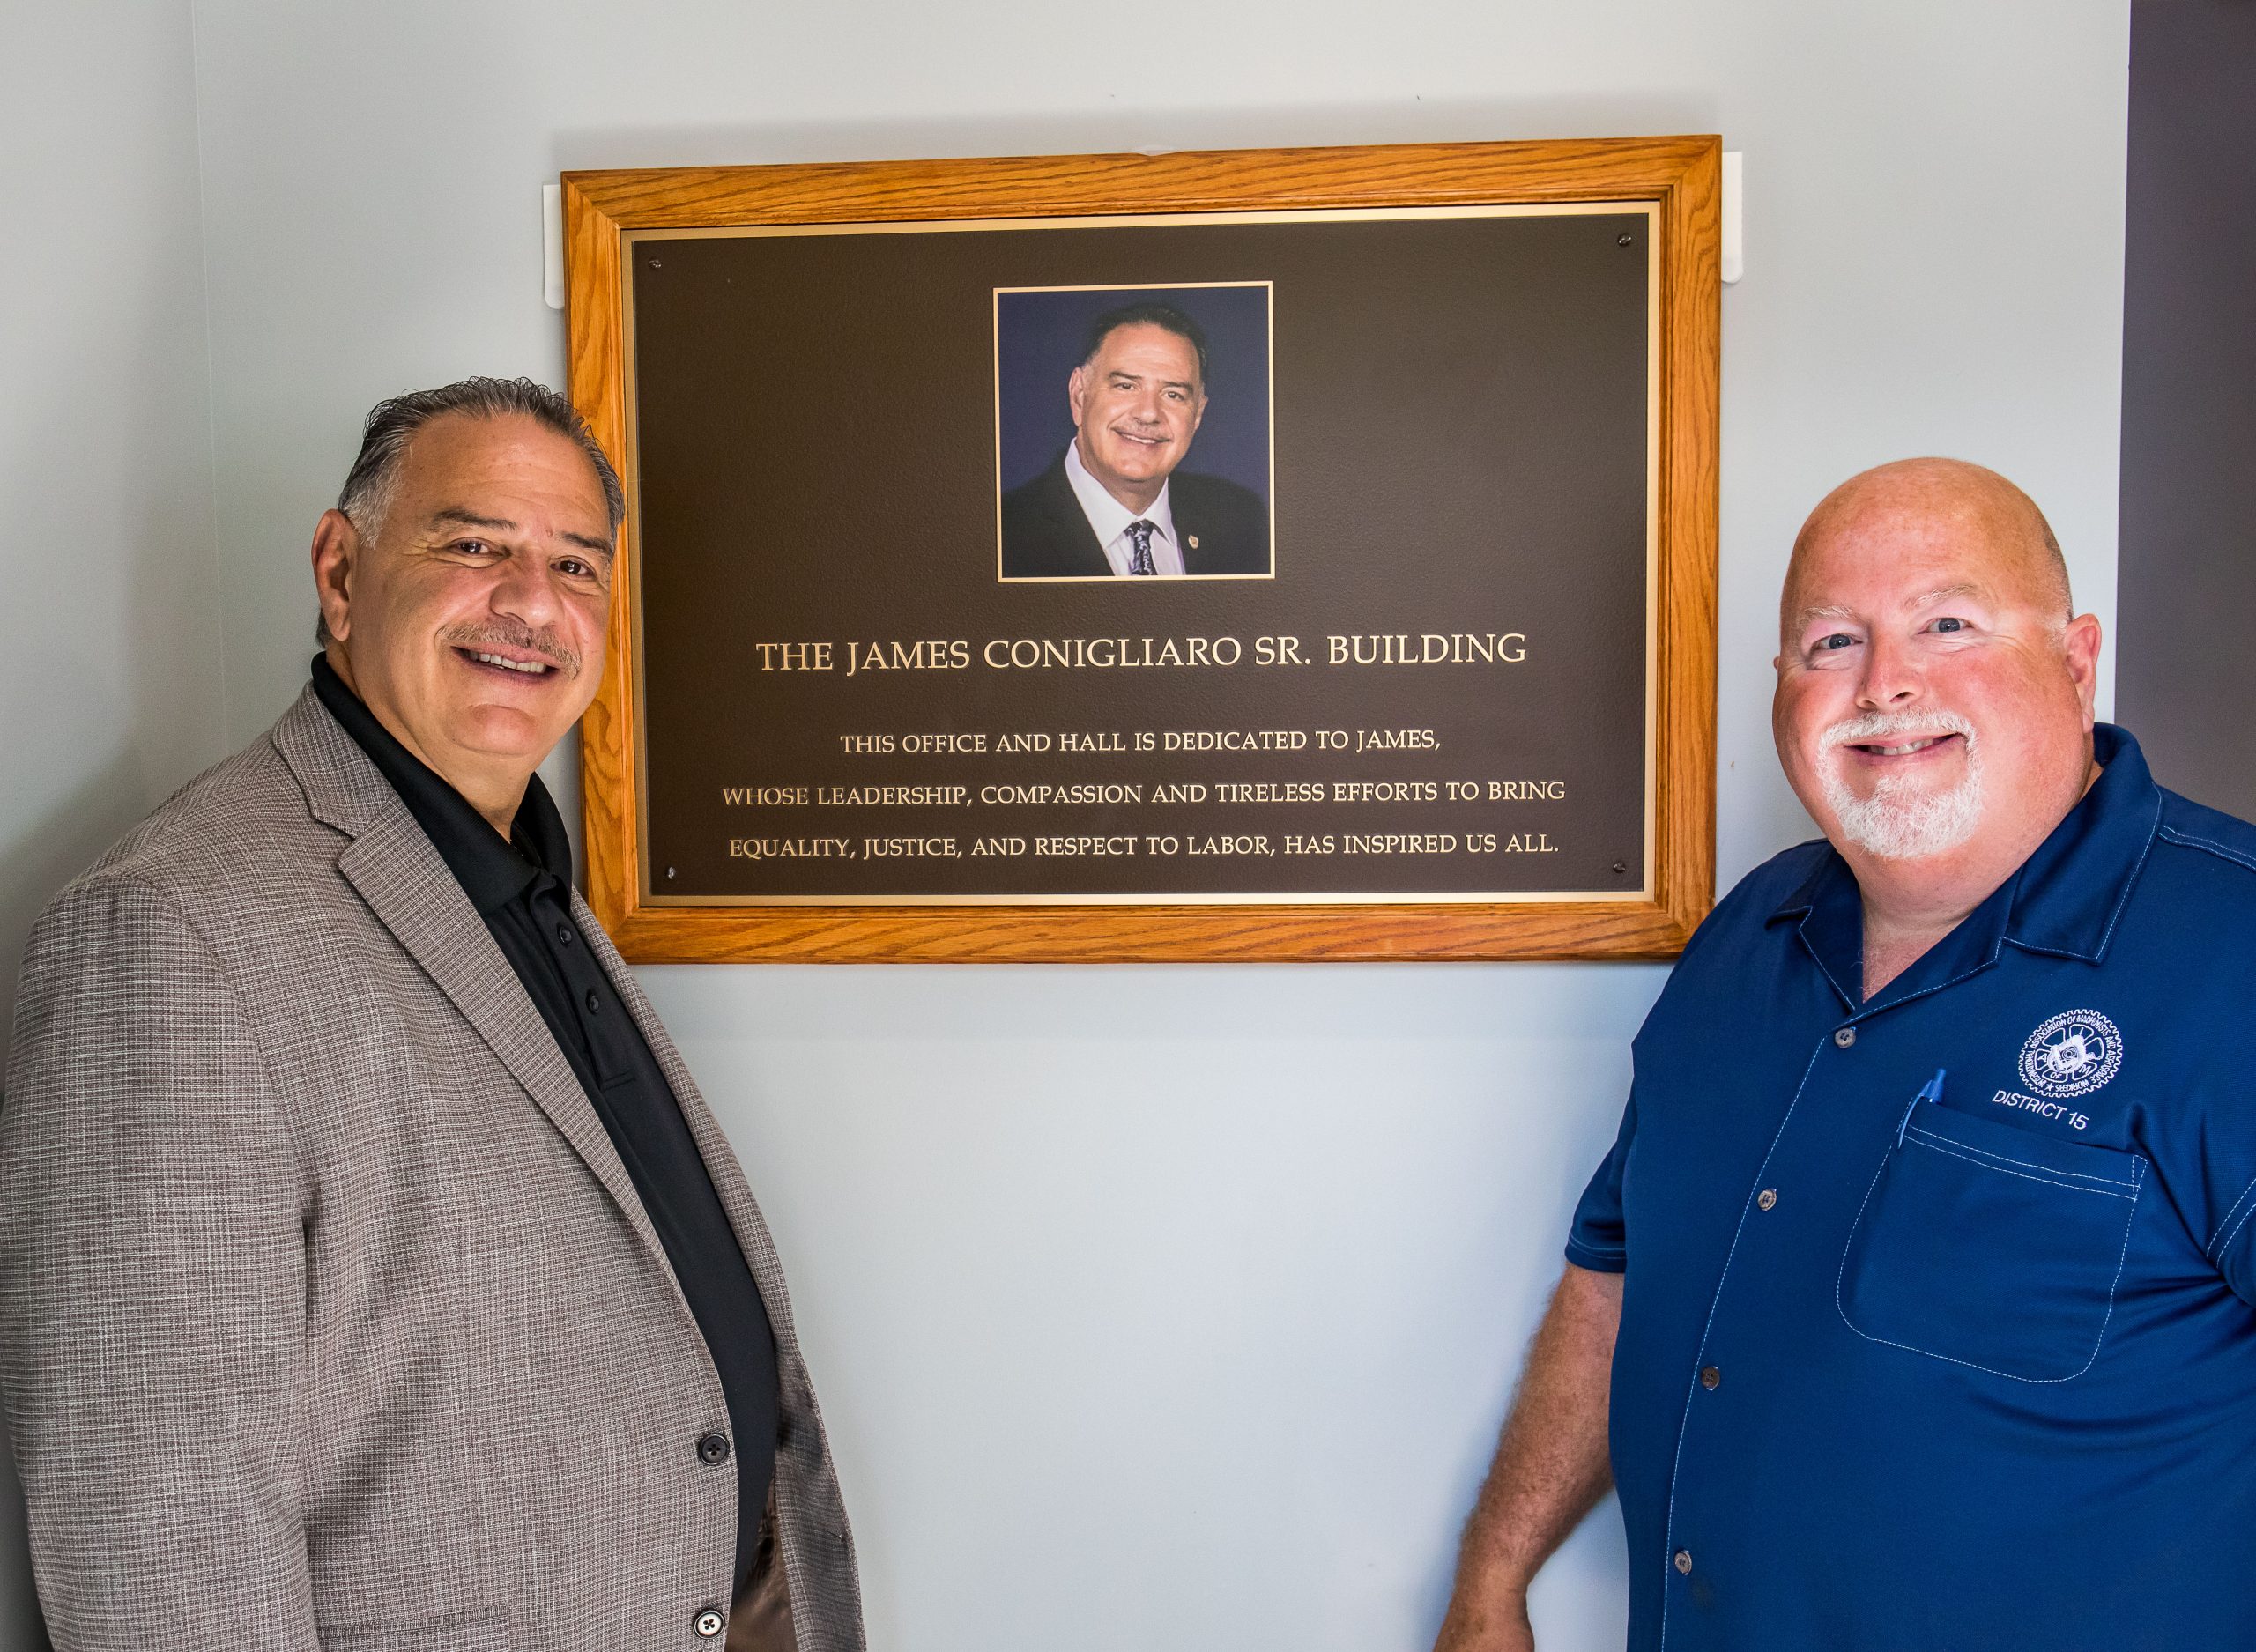 GVP Conigliaro Honored with District 15 Building Dedication